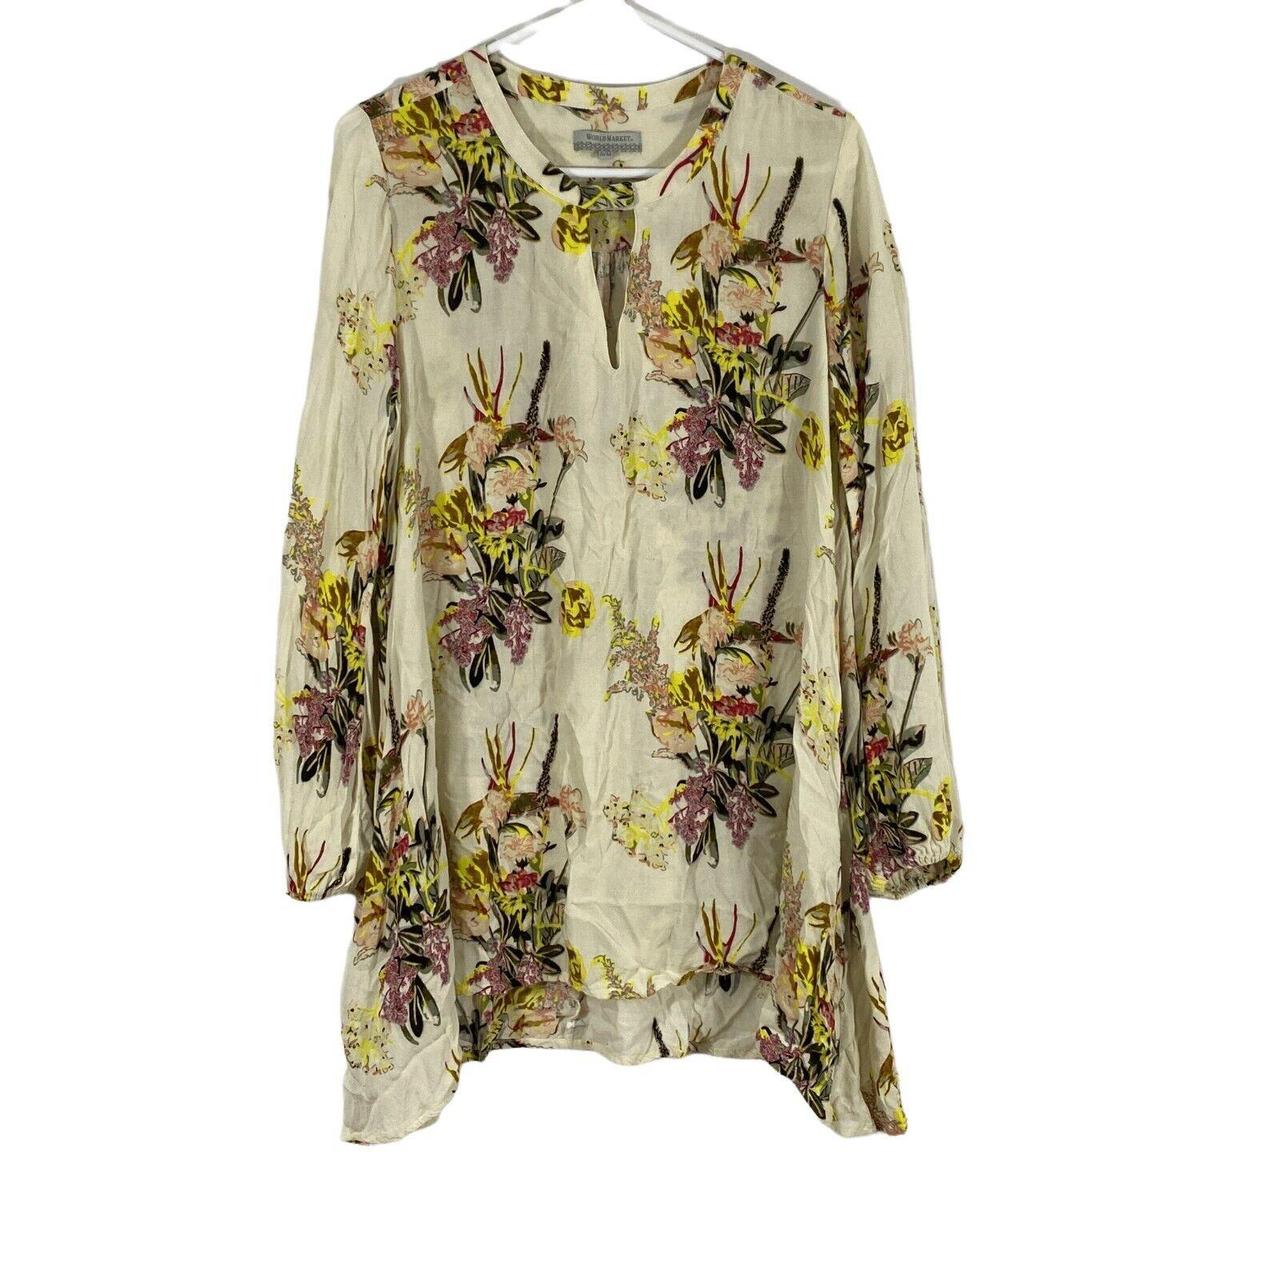 Product Image 1 - World Market Womens White Floral